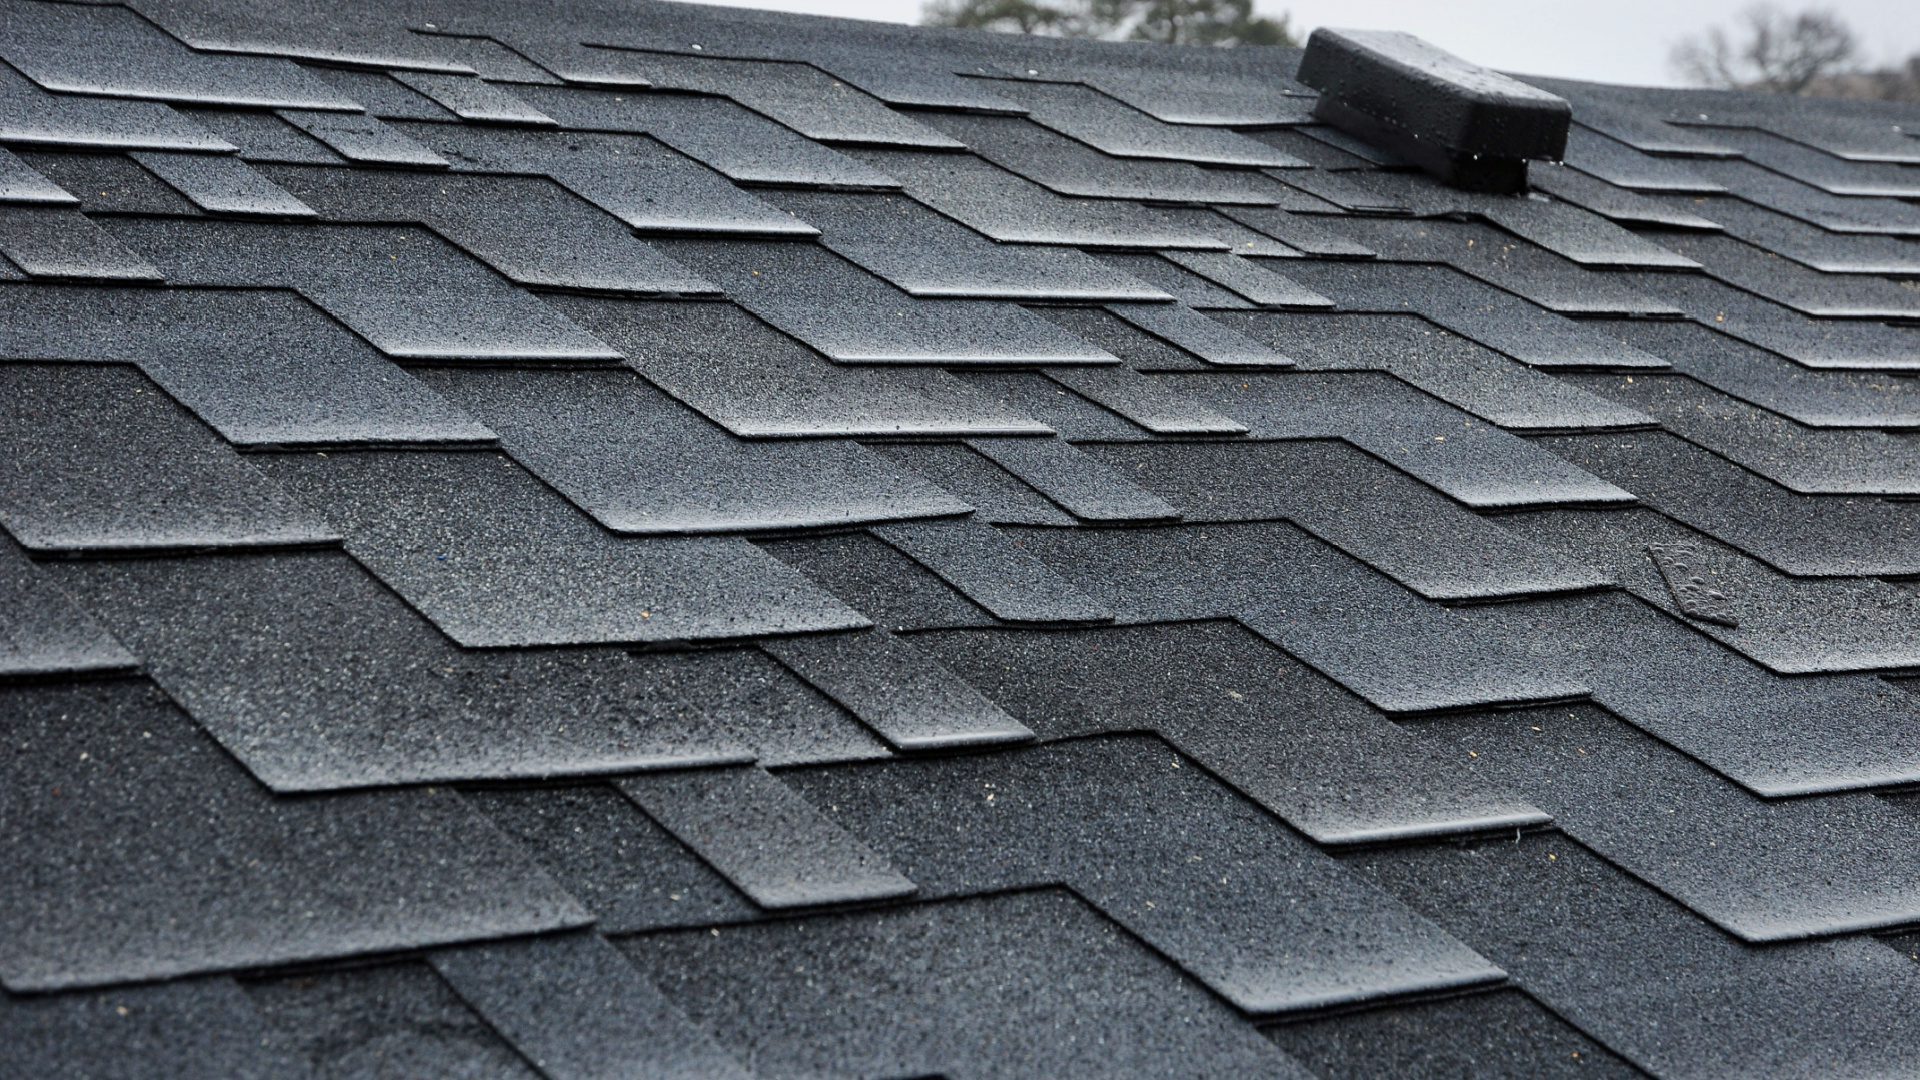 What Are Asphalt Roof Shingles Made Of